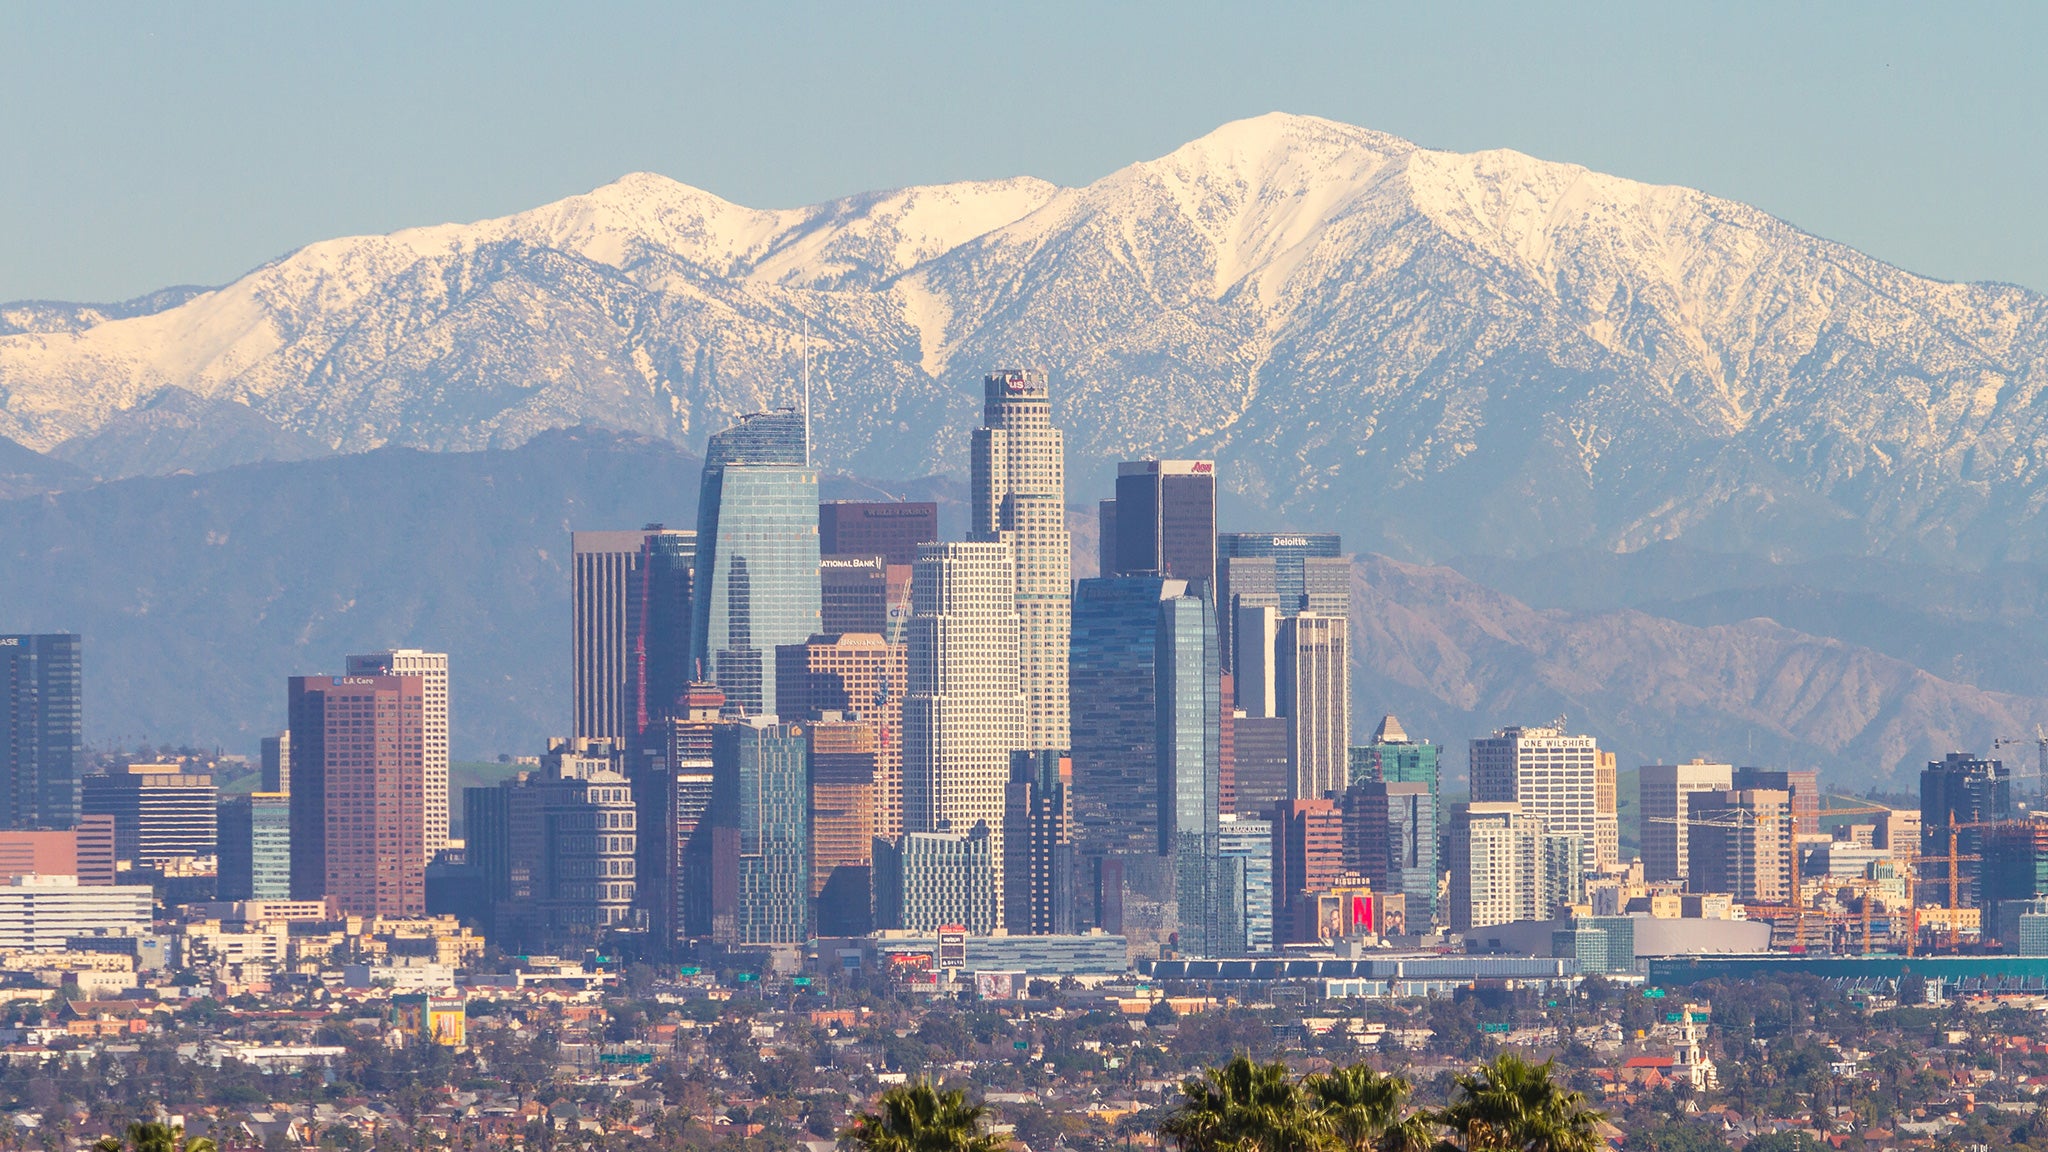 The San Gabriel mountains, seen in the distance behind downtown L.A., are topped with snow.